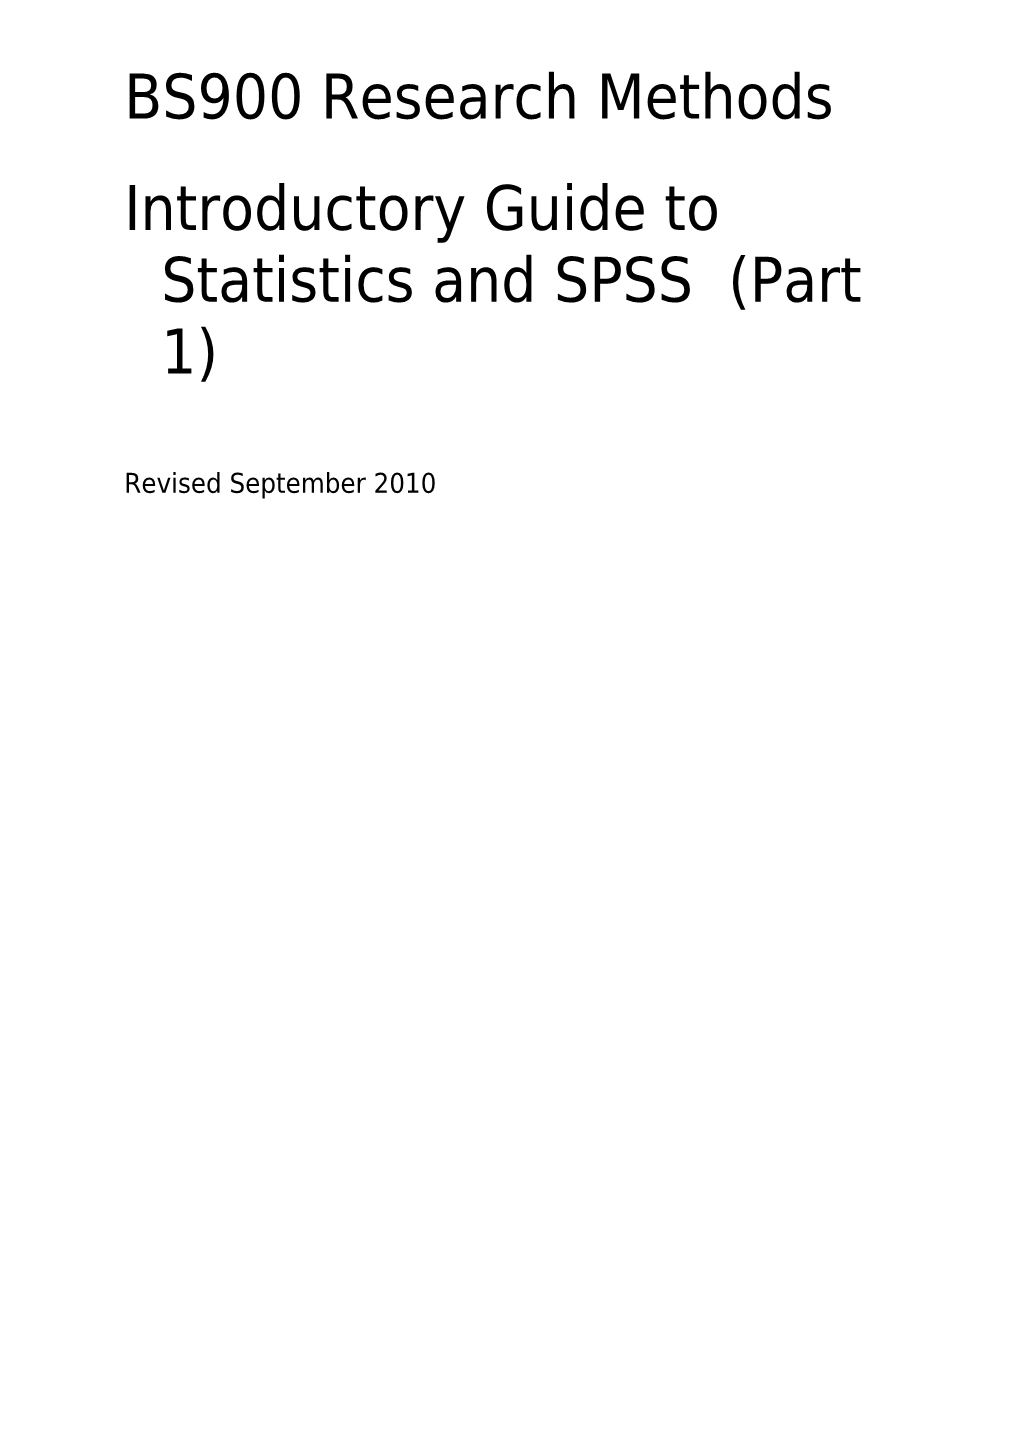 Introductory Guide to Statistics and SPSS (Part 1)